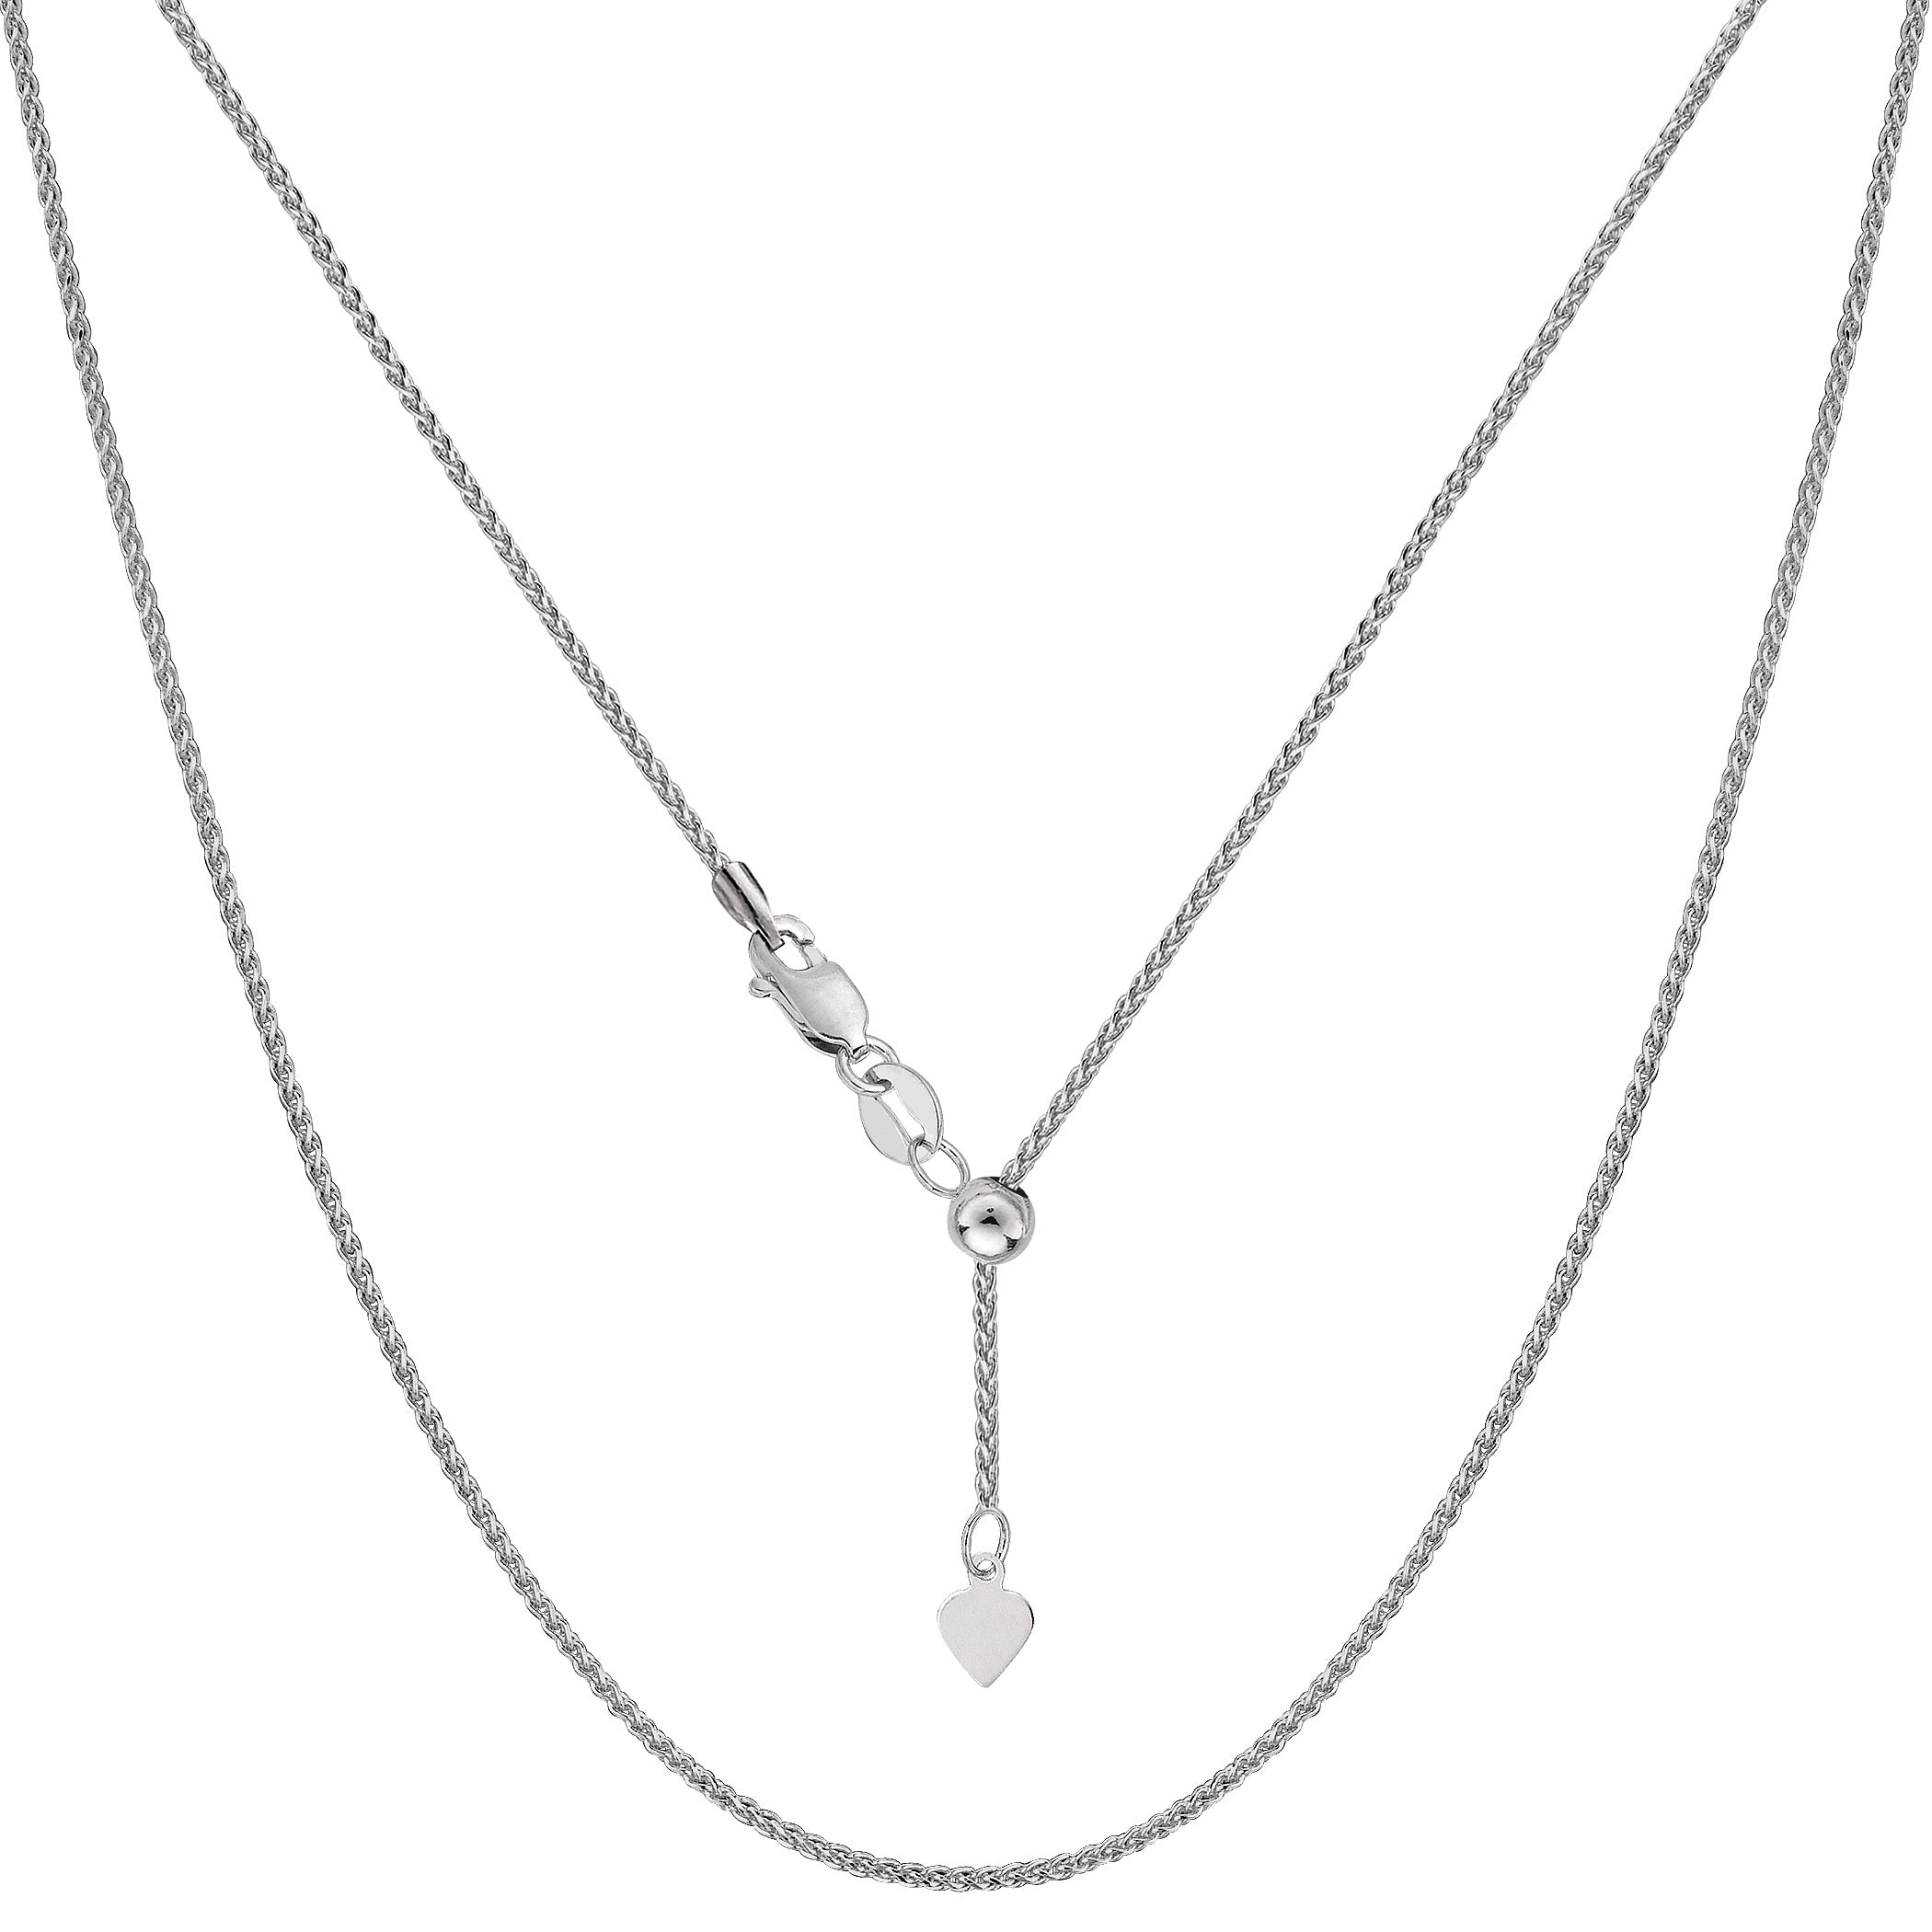 14k White Gold Adjustable Wheat Chain Necklace, 1.0mm, 22" fine designer jewelry for men and women